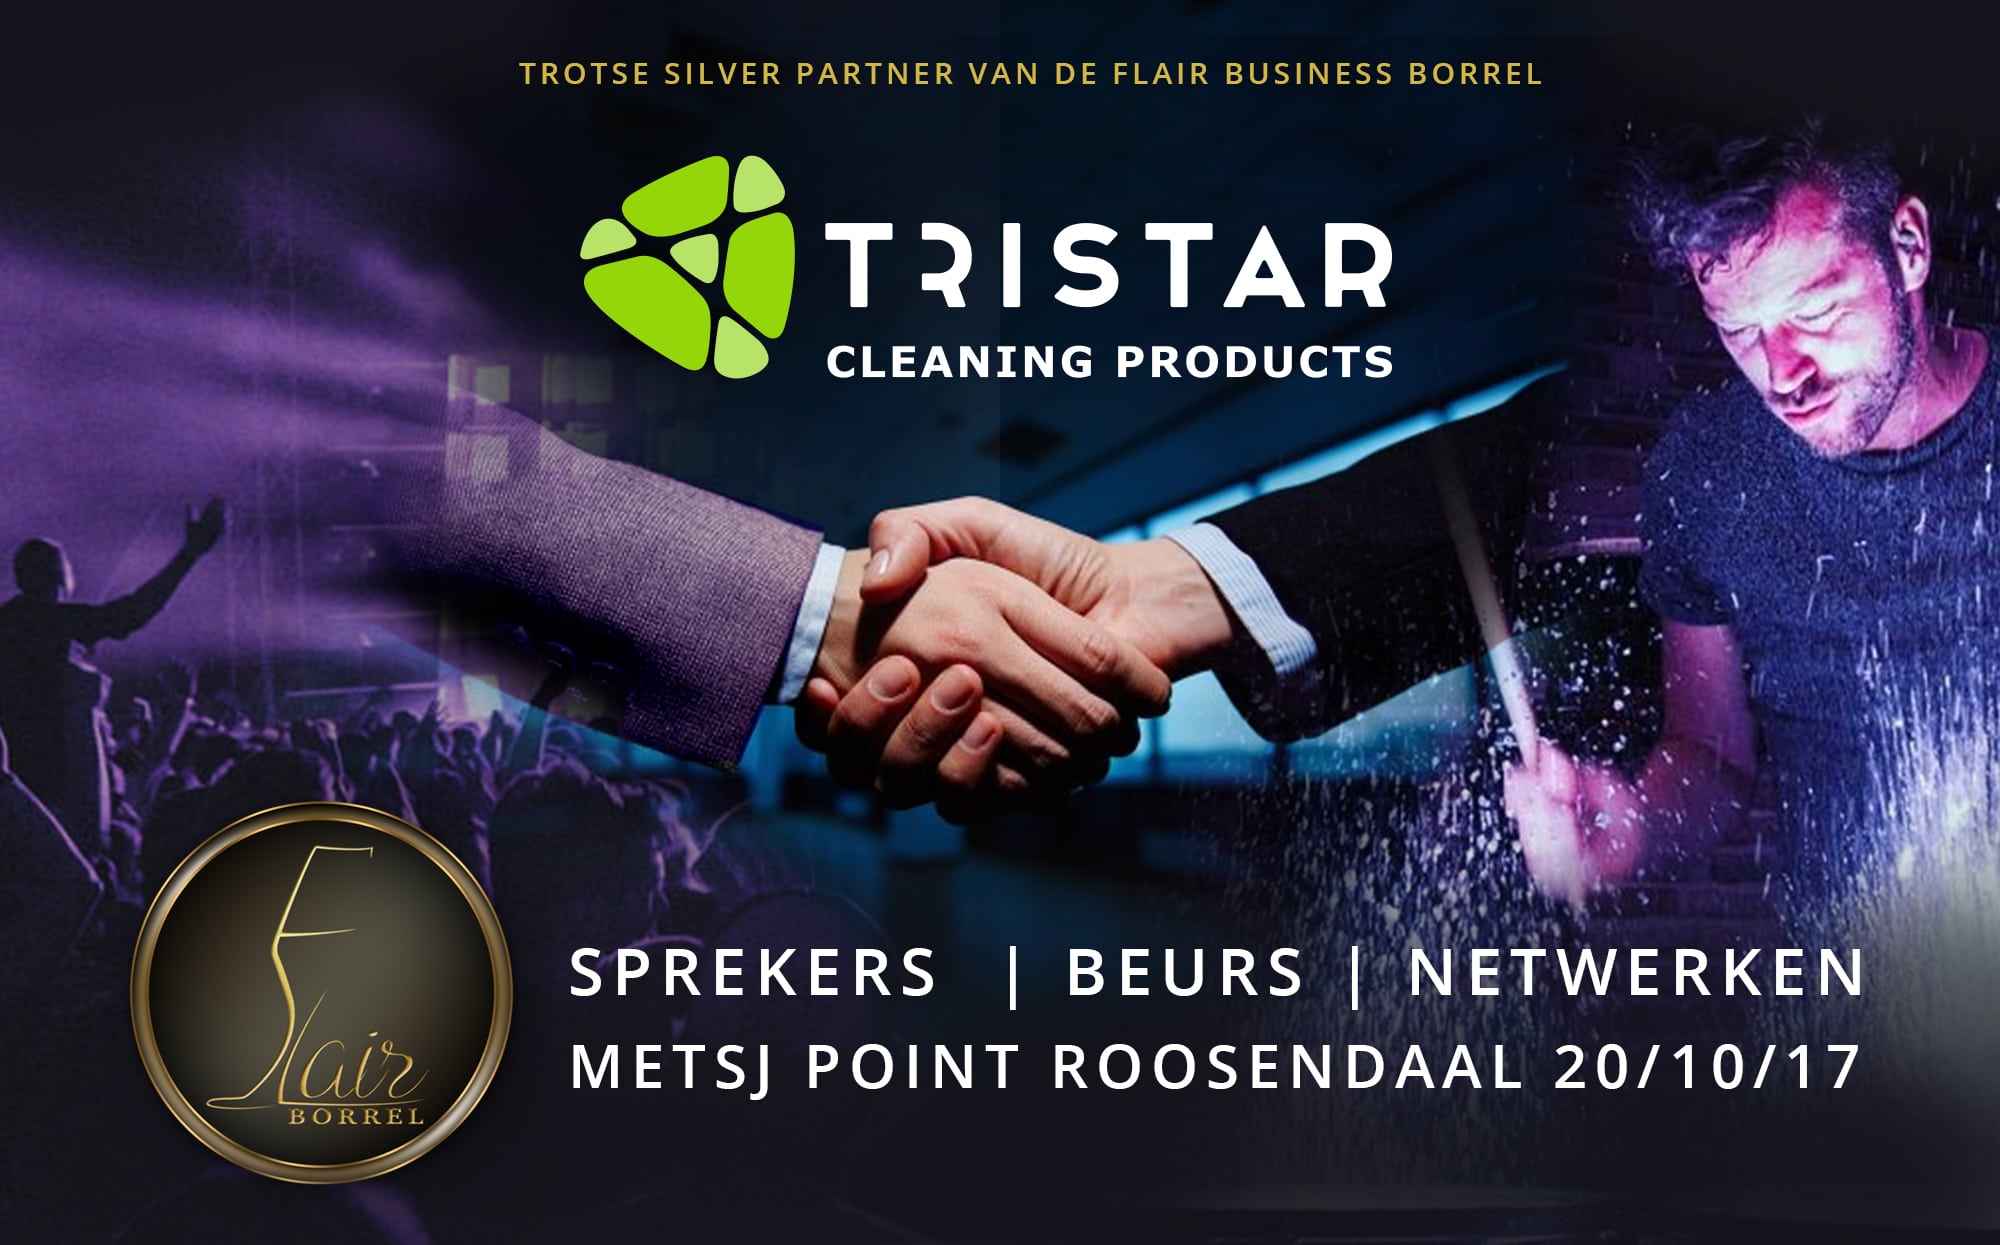 TRISTAR PROUD SILVER PARTNER OF THE FLAIR BUSINESS BORREL